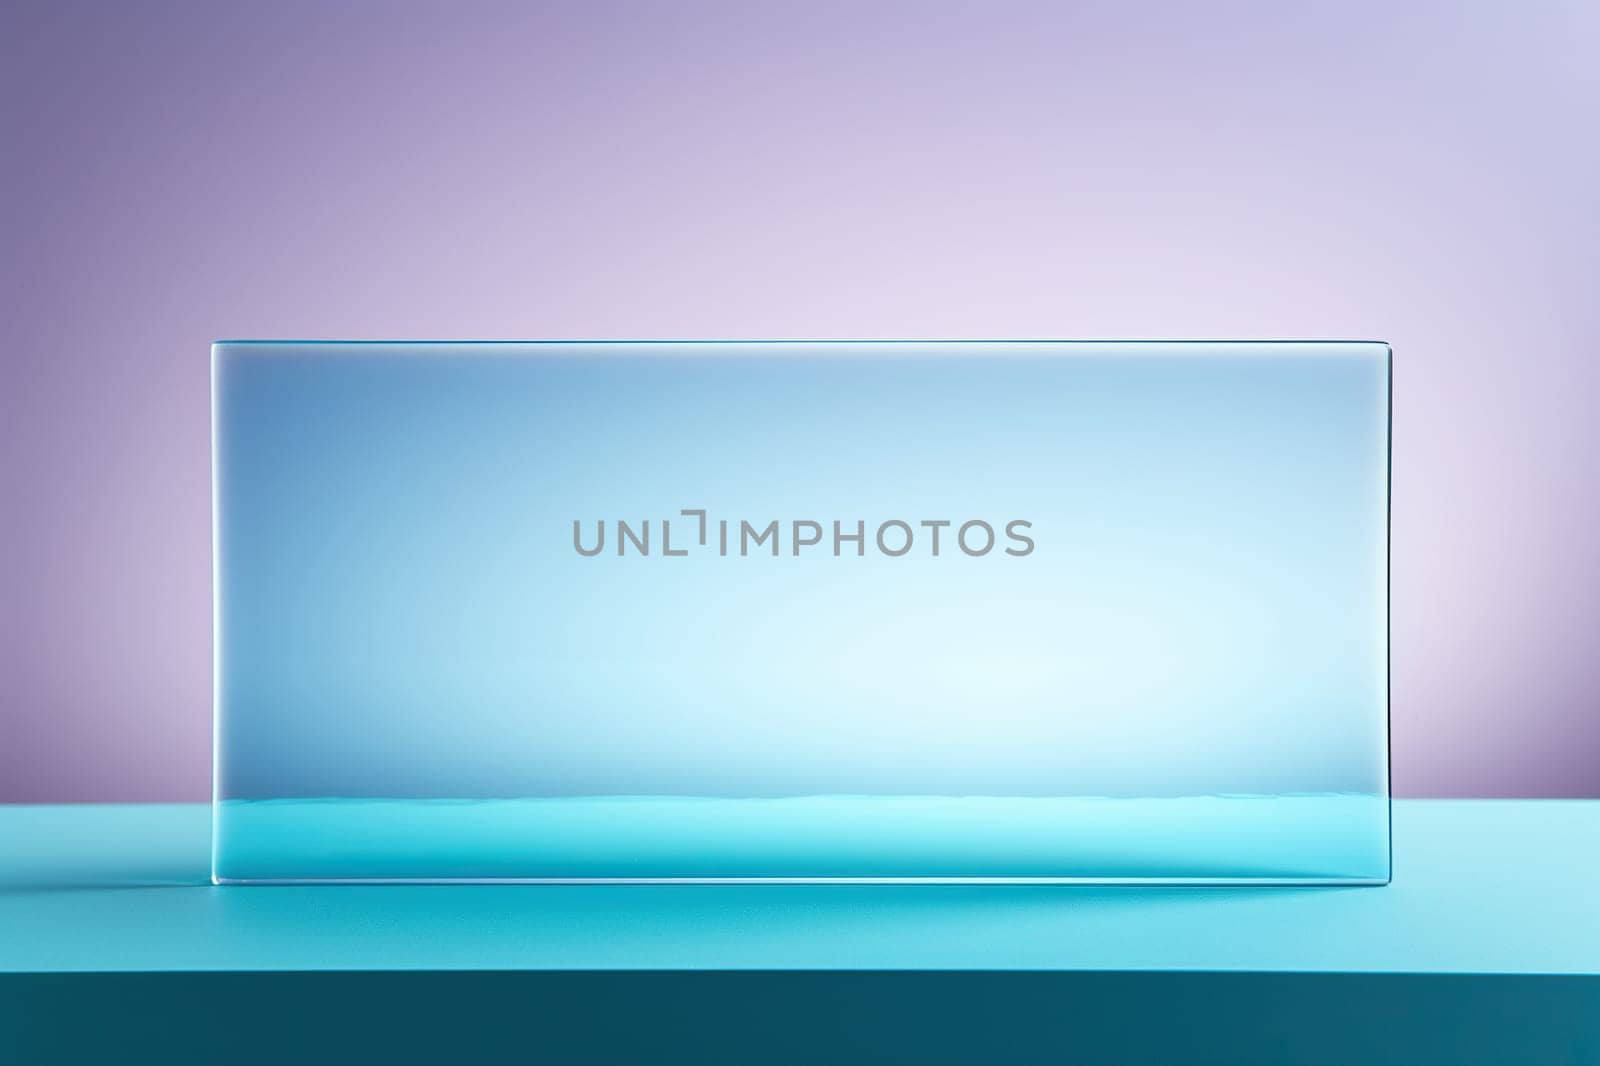 Transparent glass matte rectangle on a turquoise podium. Frosted glass texture.